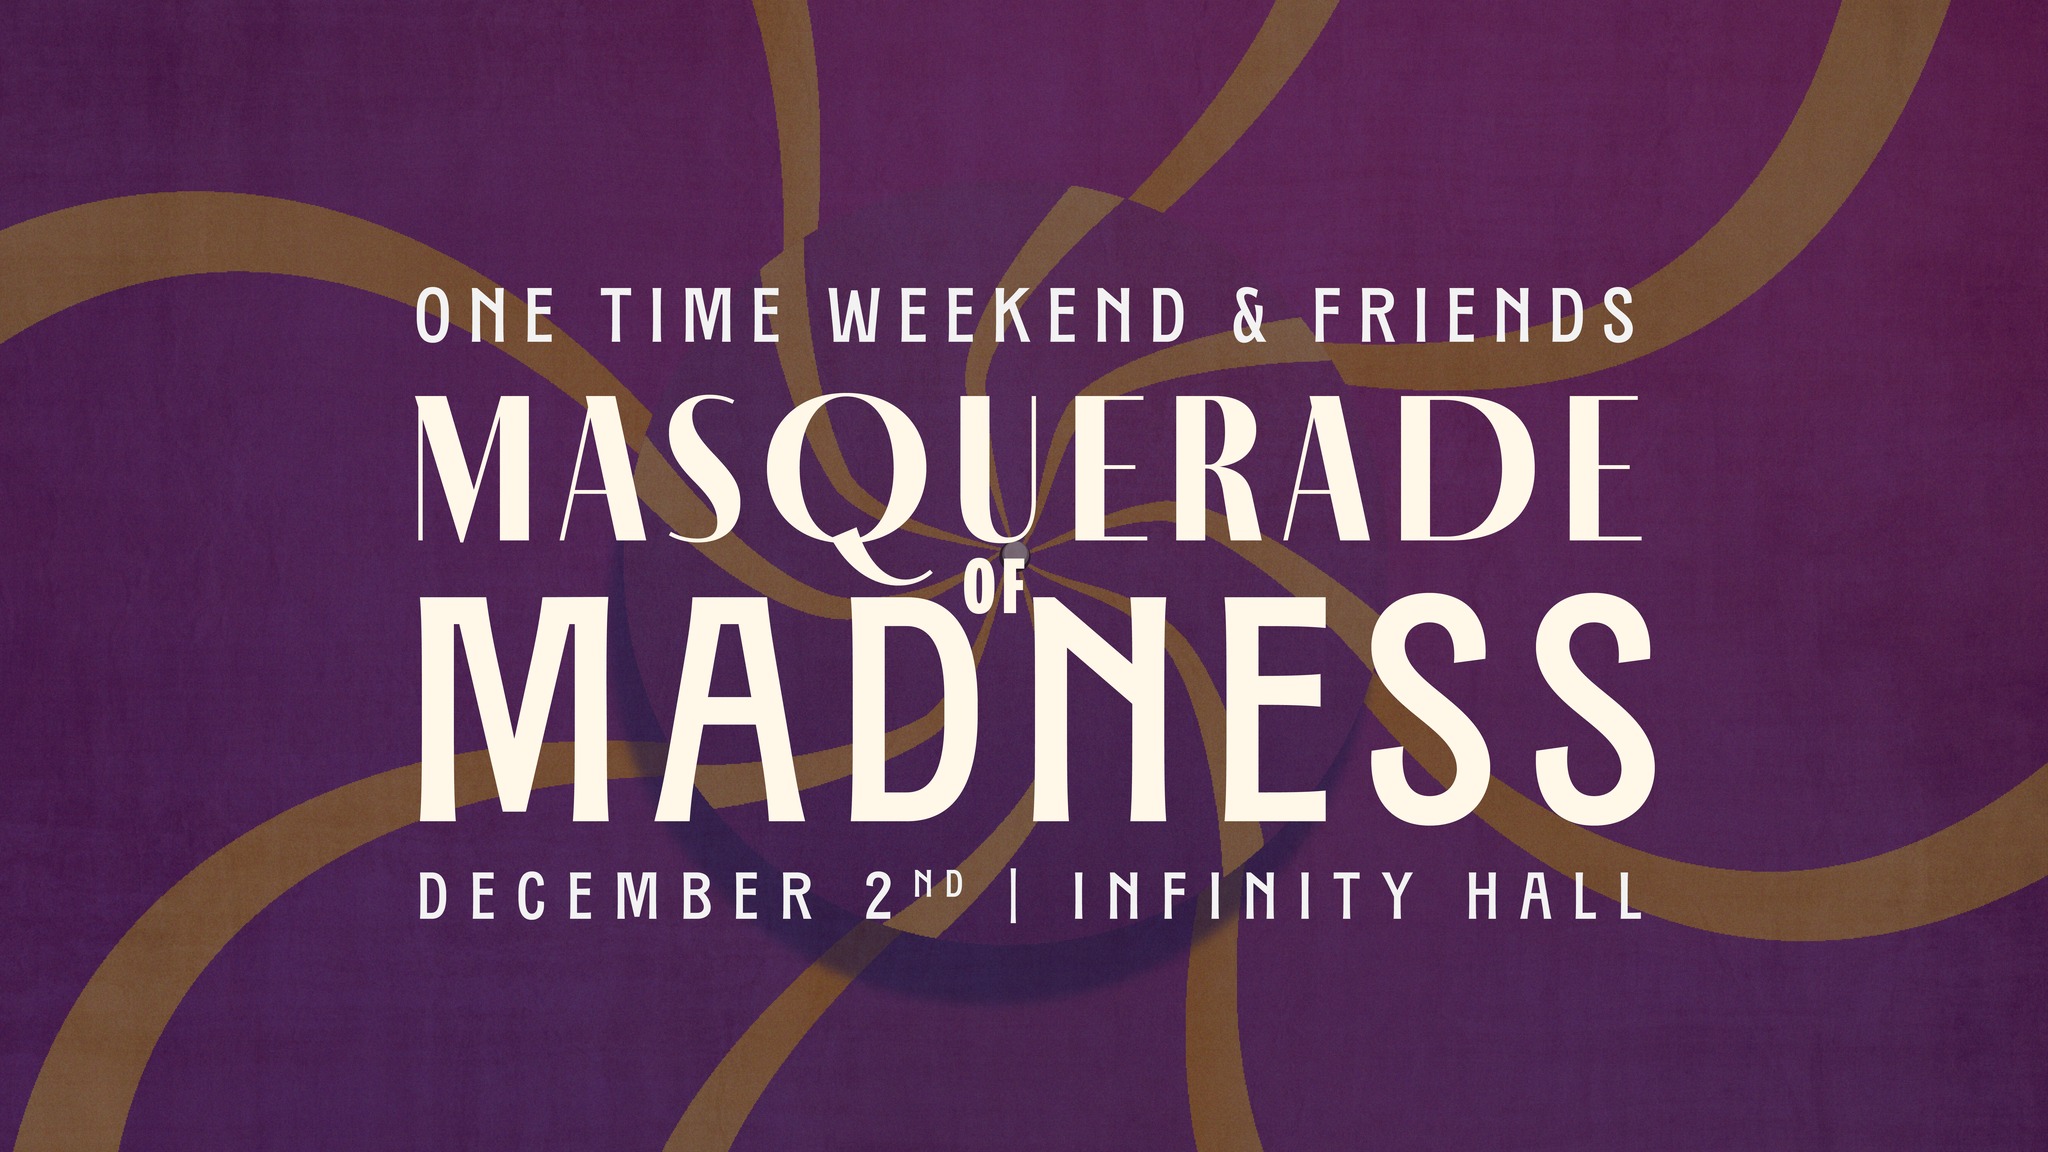 Step into a “Masquerade of Madness” with One Time Weekend & Friends